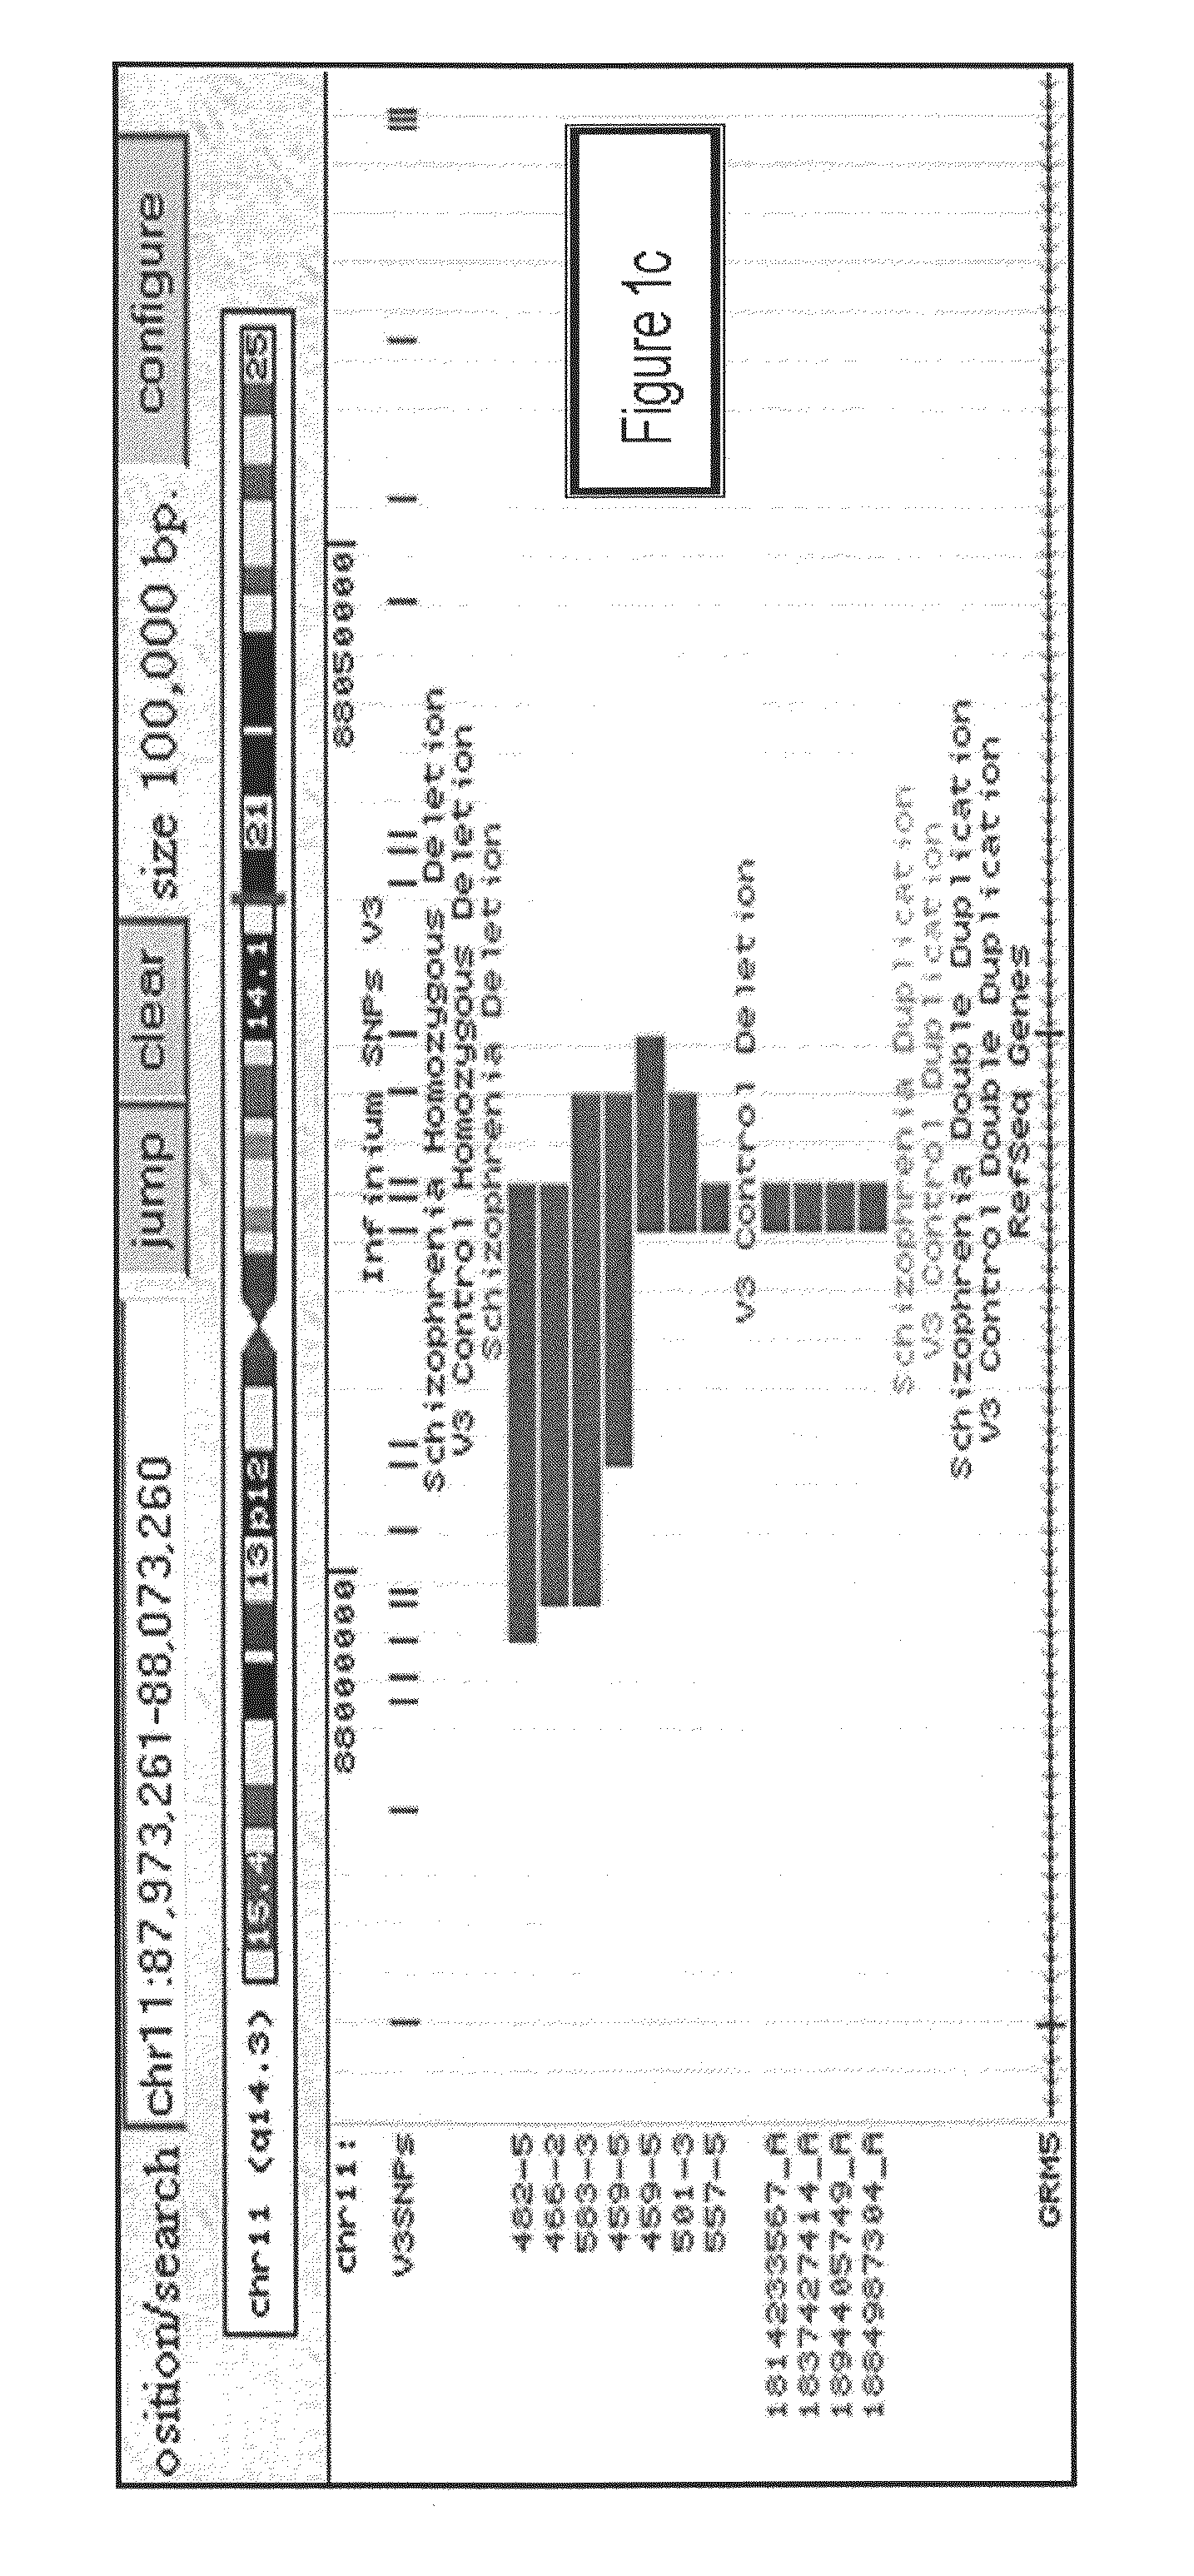 Genetic Alterations Associated with Schizophrenia and Methods of Use Thereof for the Diagnosis and Treatment of the Same